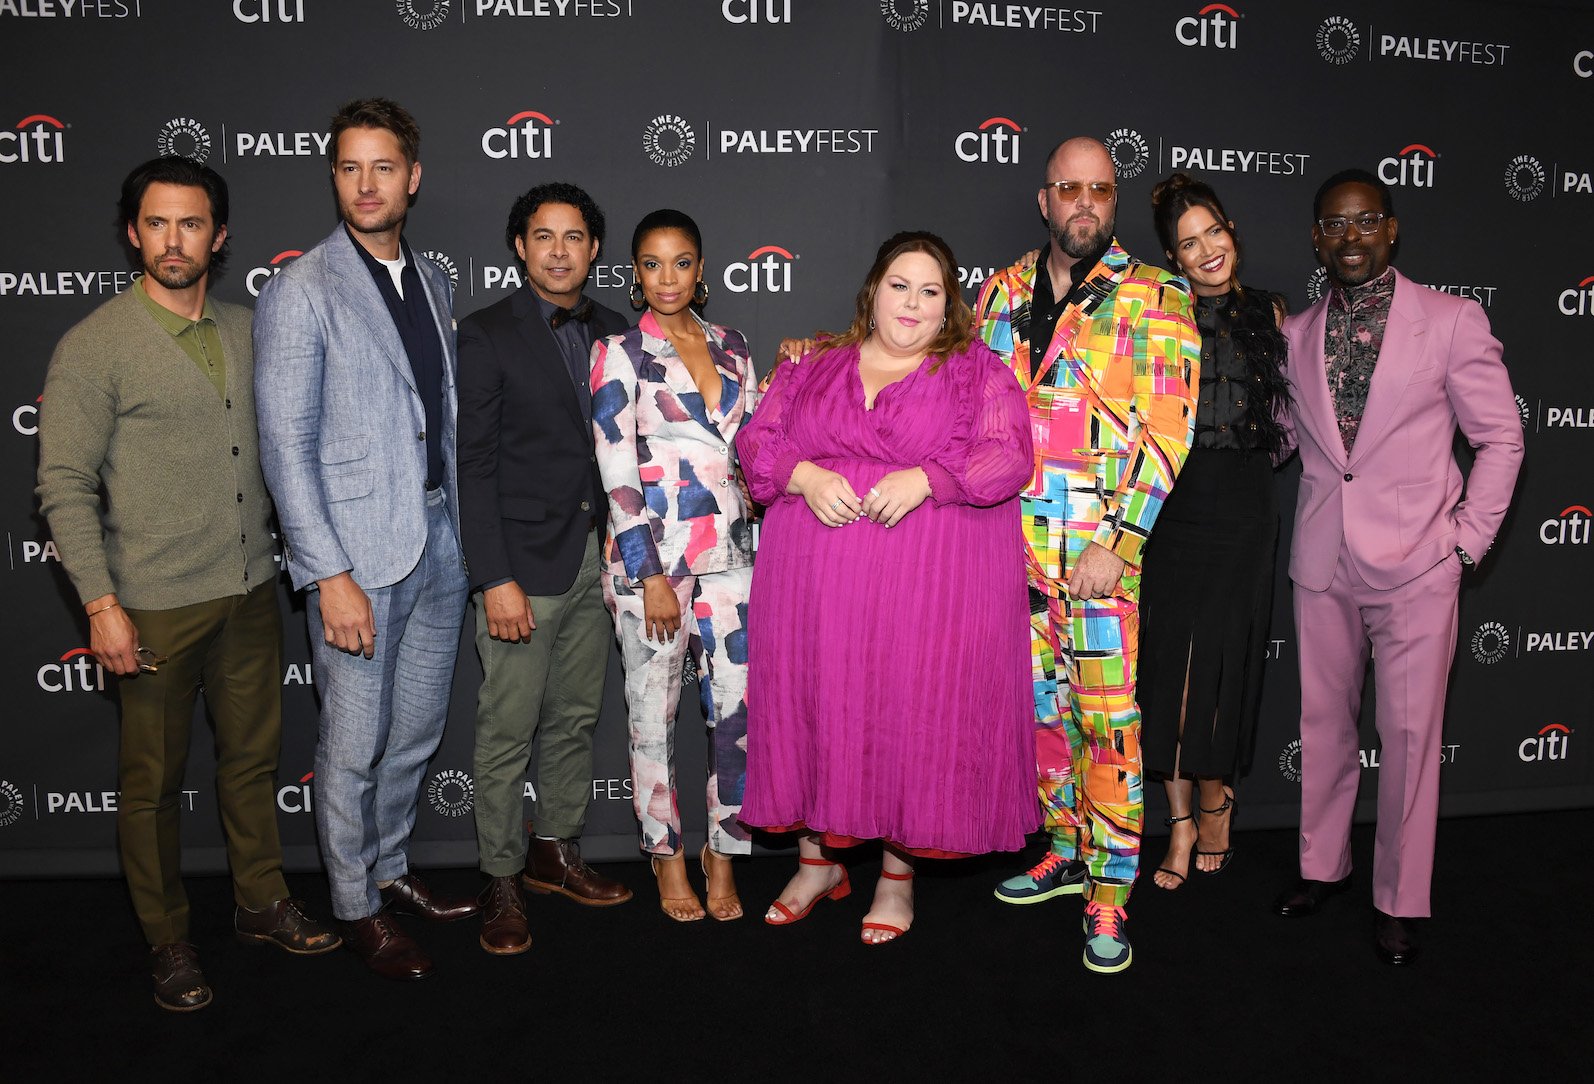 Milo Ventimiglia, Justin Hartley, Jon Huertas, Susan Kelechi Watson, Chrissy Metz, Chris Sullivan, Mandy Moore, and Sterling K. Brown from the 'This Is Us' cast standing together at an event